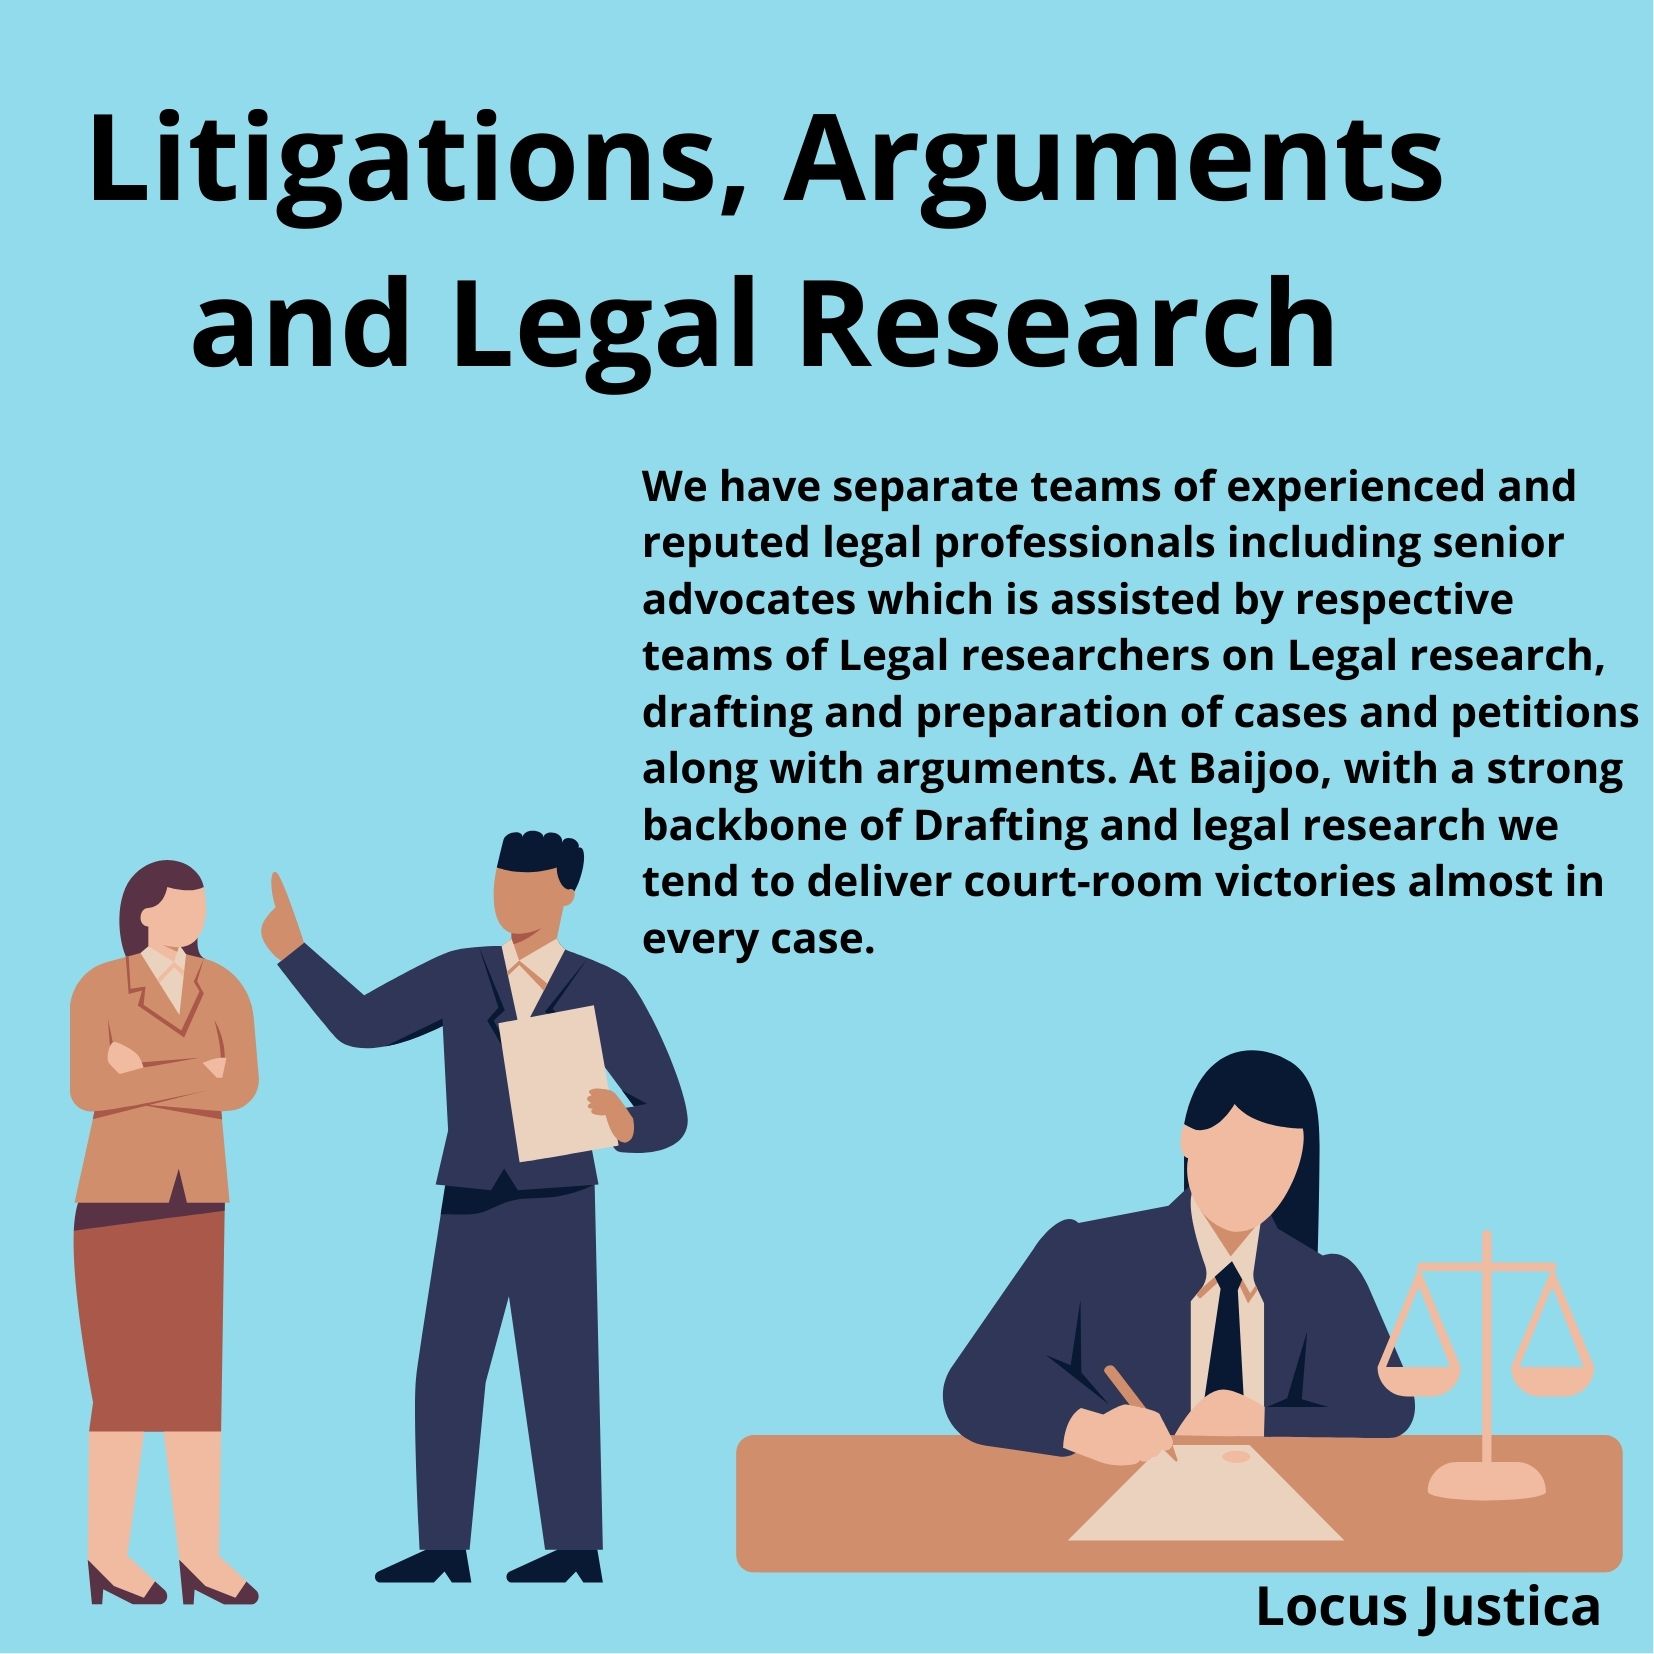 Litigations, Arguments and Legal Research